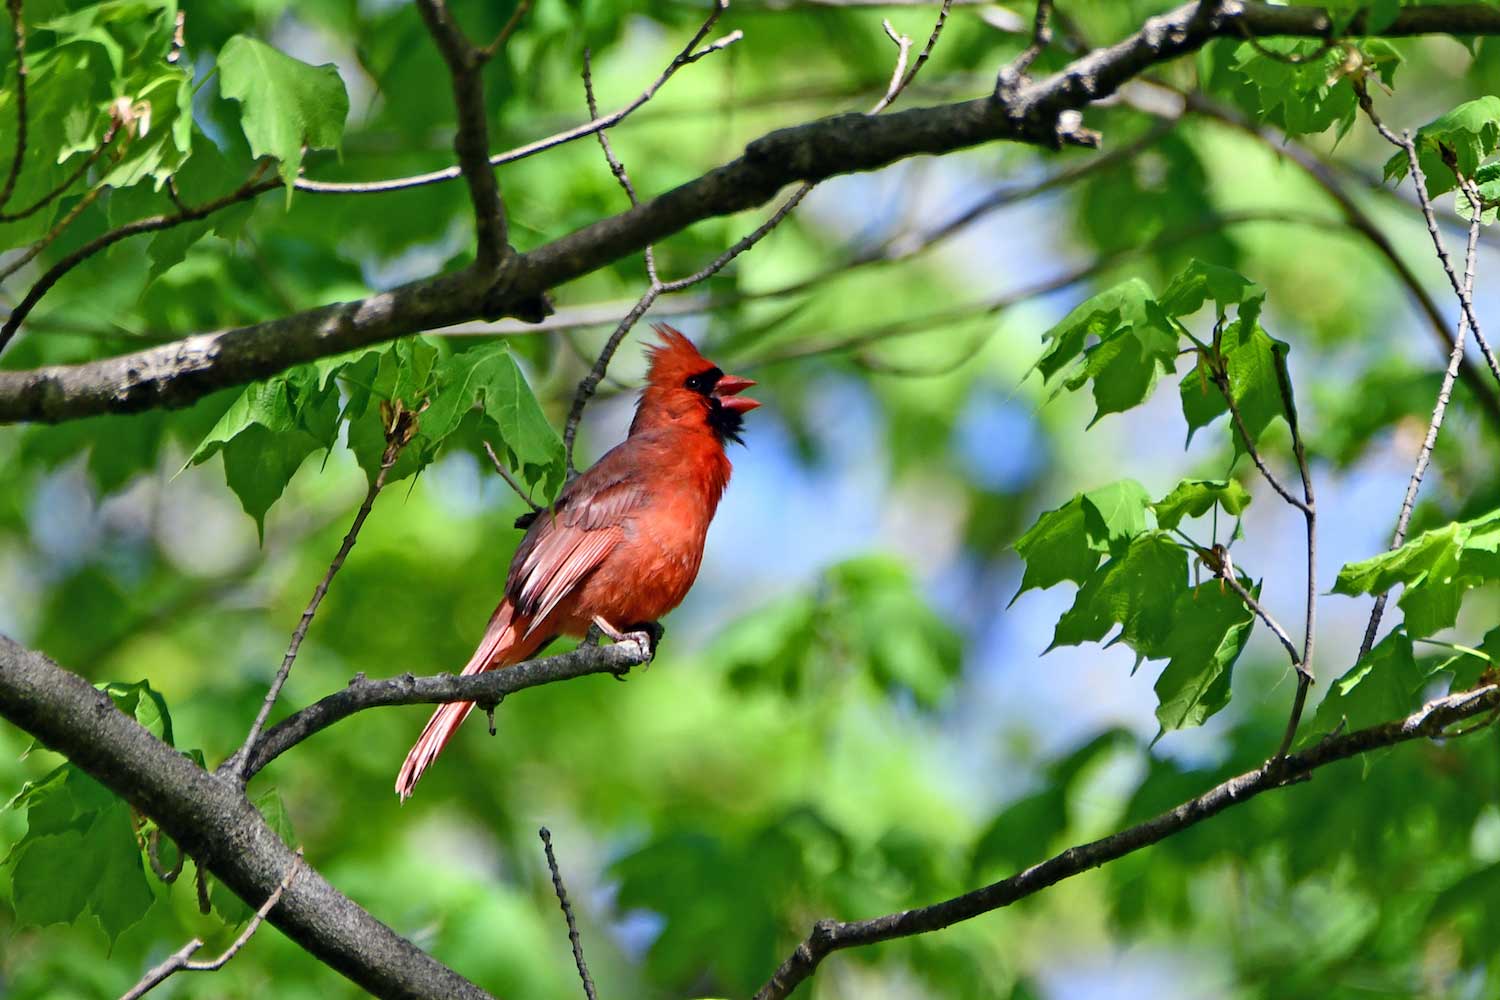 A male cardinal in a tree with its mouth open.